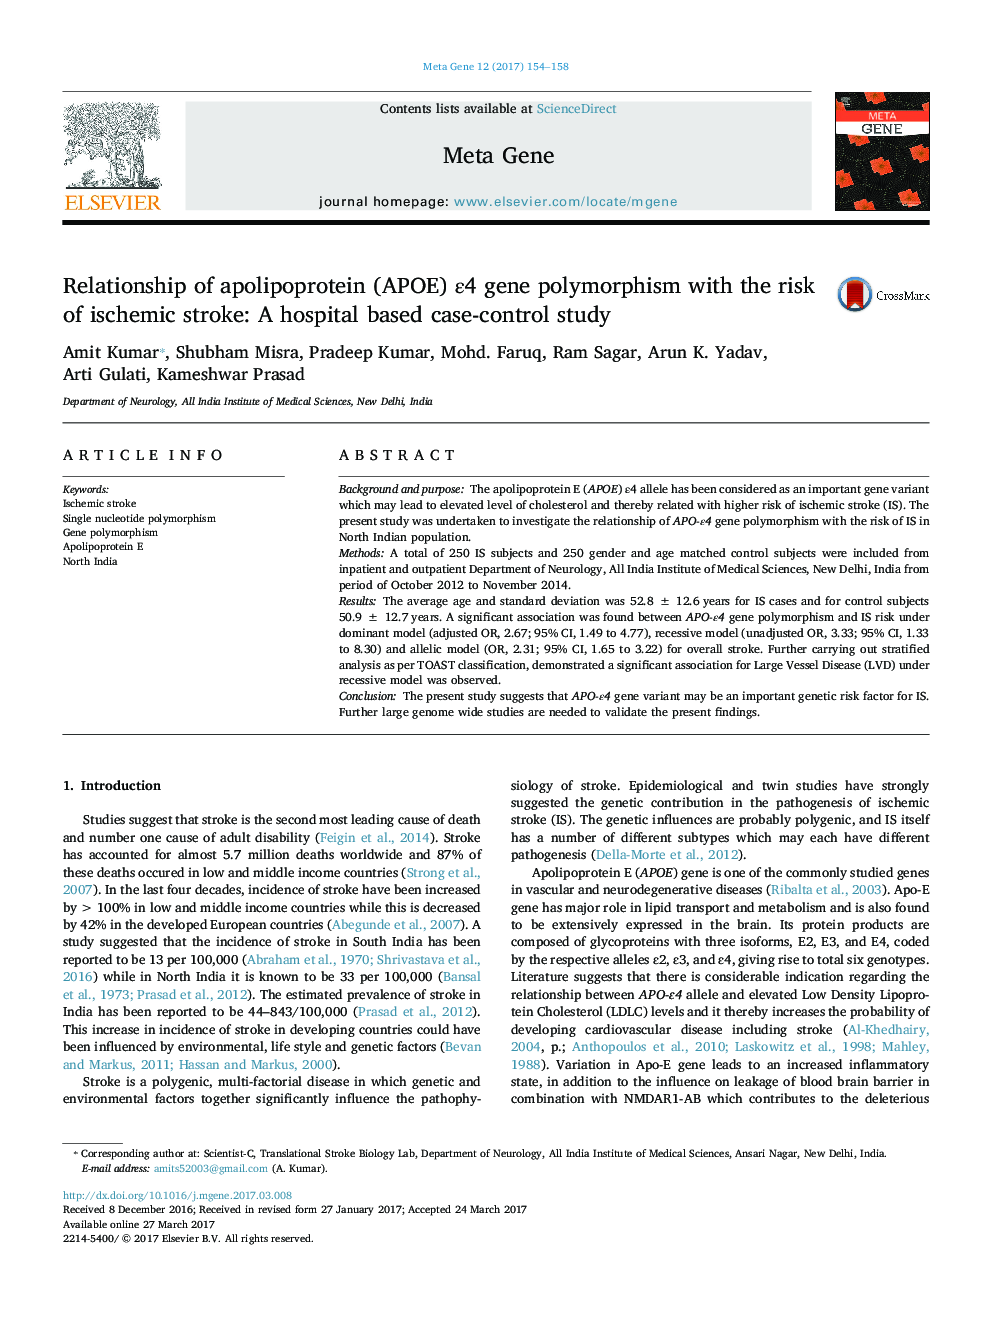 Relationship of apolipoprotein (APOE) Îµ4 gene polymorphism with the risk of ischemic stroke: A hospital based case-control study